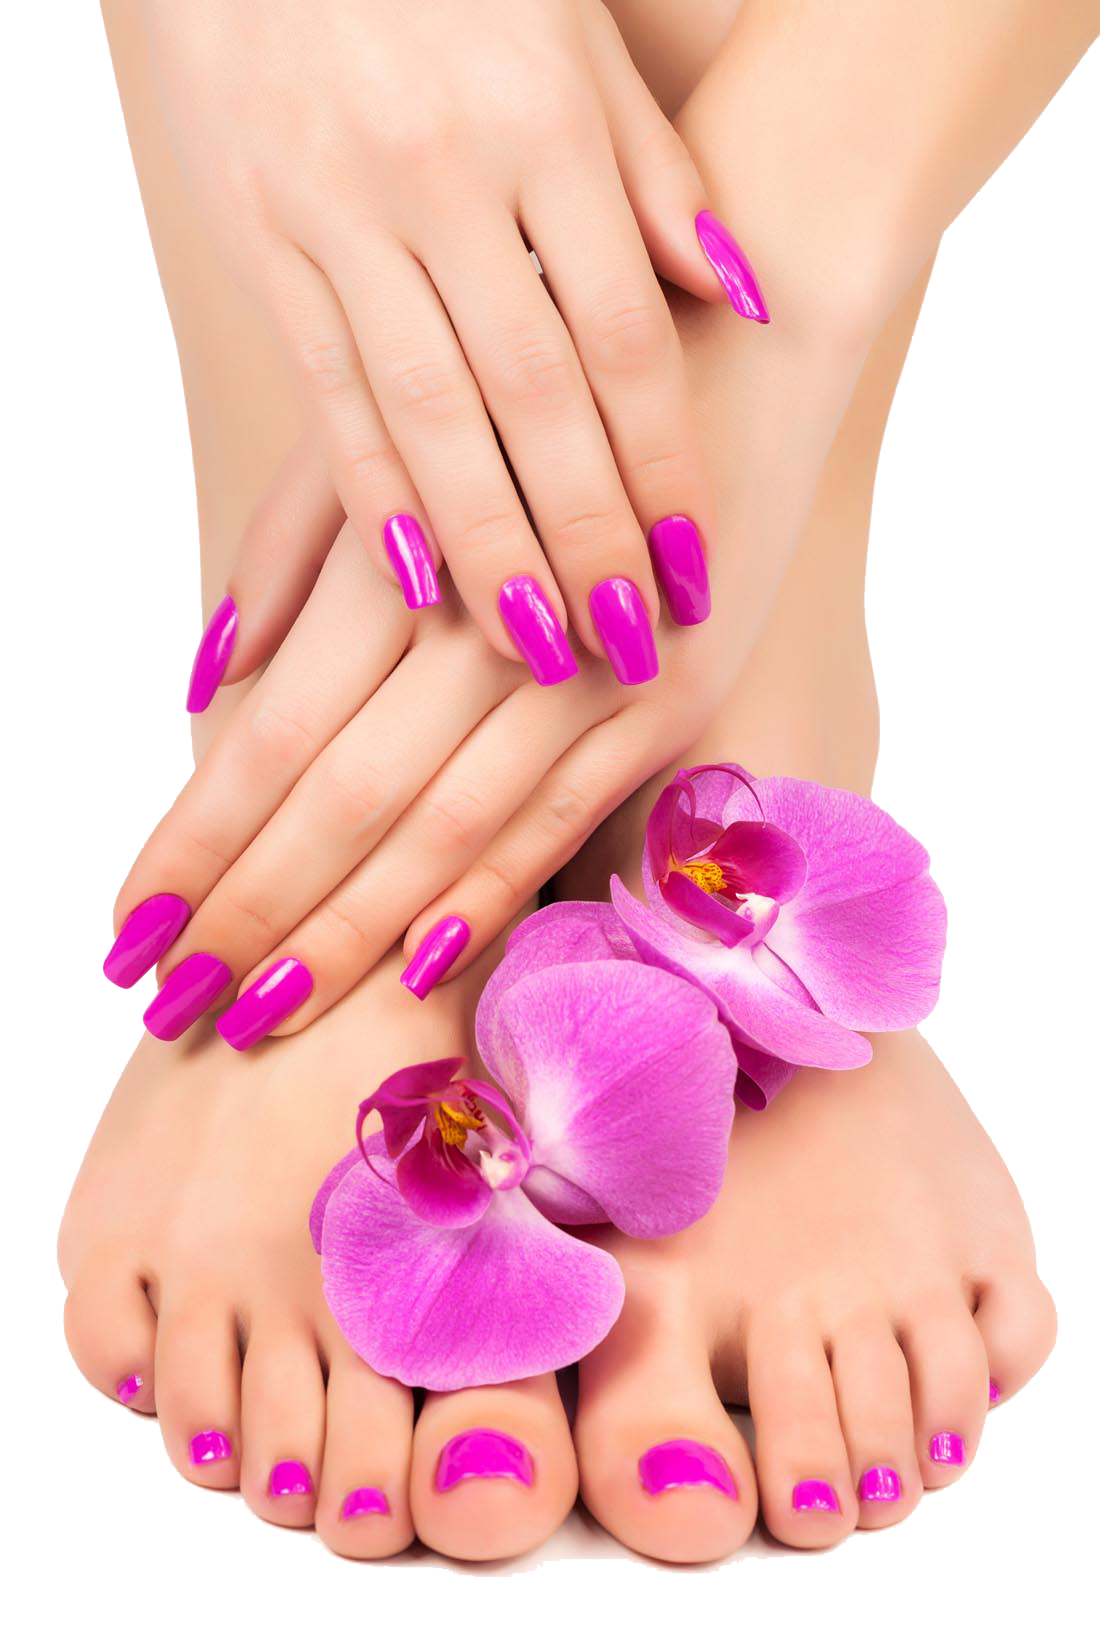 Download And Feet Close-Up Pedicure Lotion Nail Manicure Clipart PNG Free F...